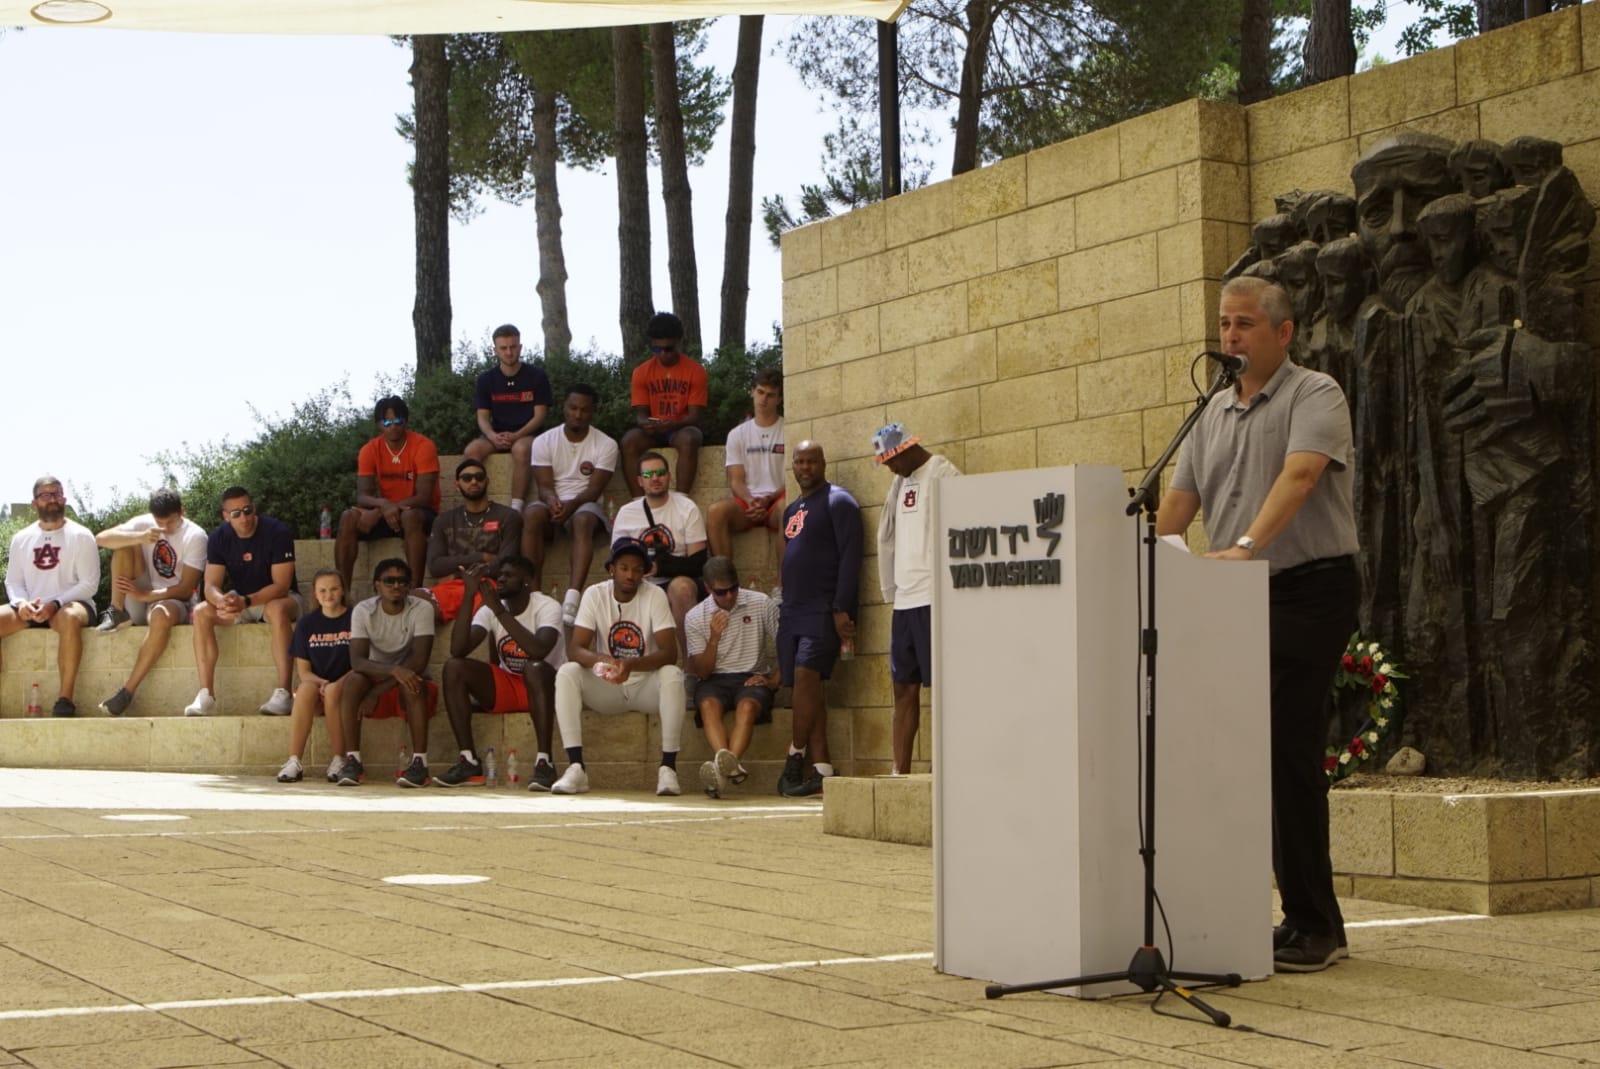 American Society for Yad Vashem Board Member Lawrence Burian addressing the group